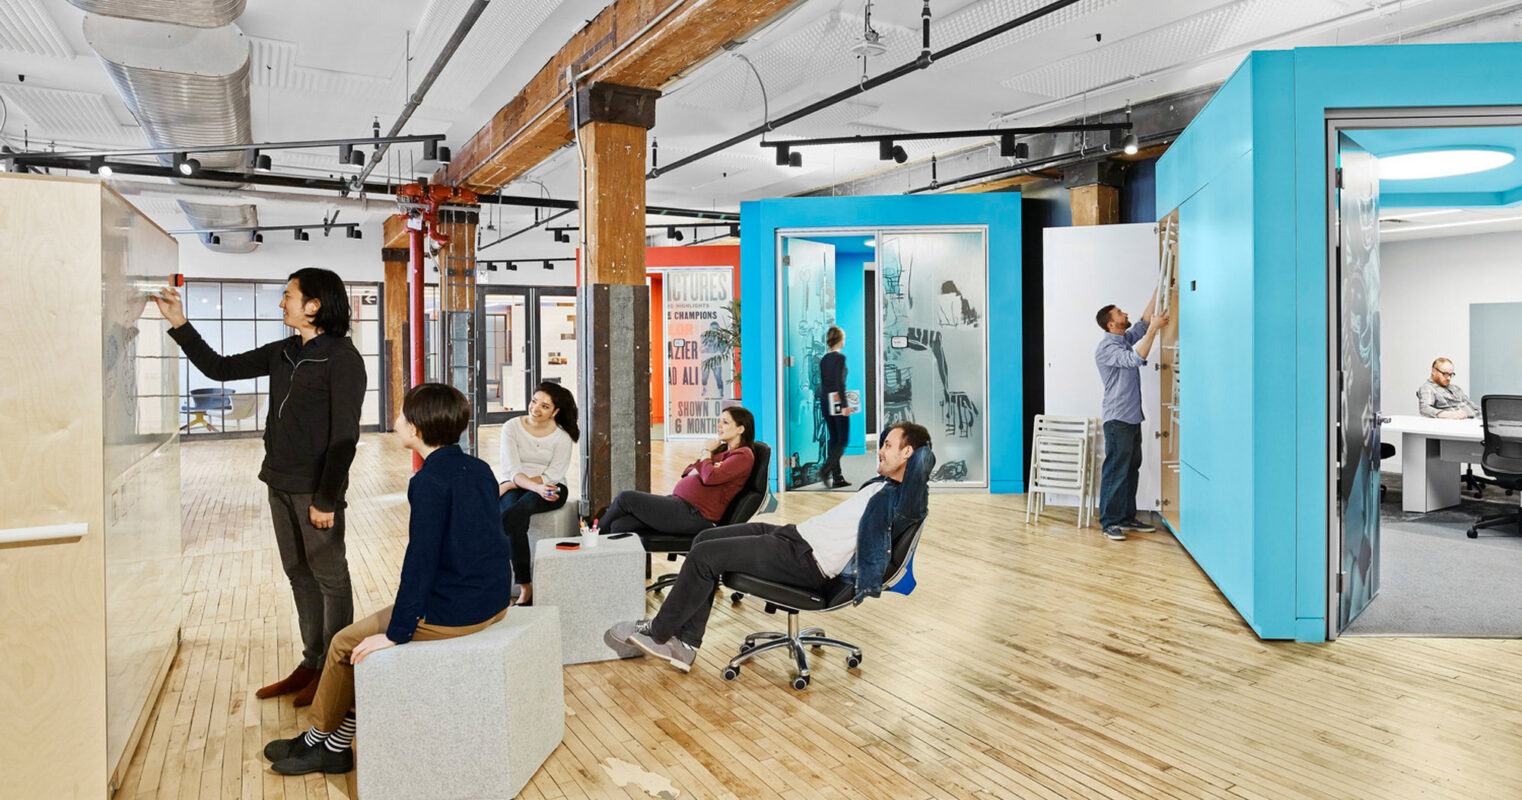 Open-plan office space blending modern and industrial elements, featuring exposed brick and wooden beams, vibrant teal office pods with frosted glass, hardwood floors, and a mix of seated and standing workspace options. Employees actively engage in collaborative and individual tasks.